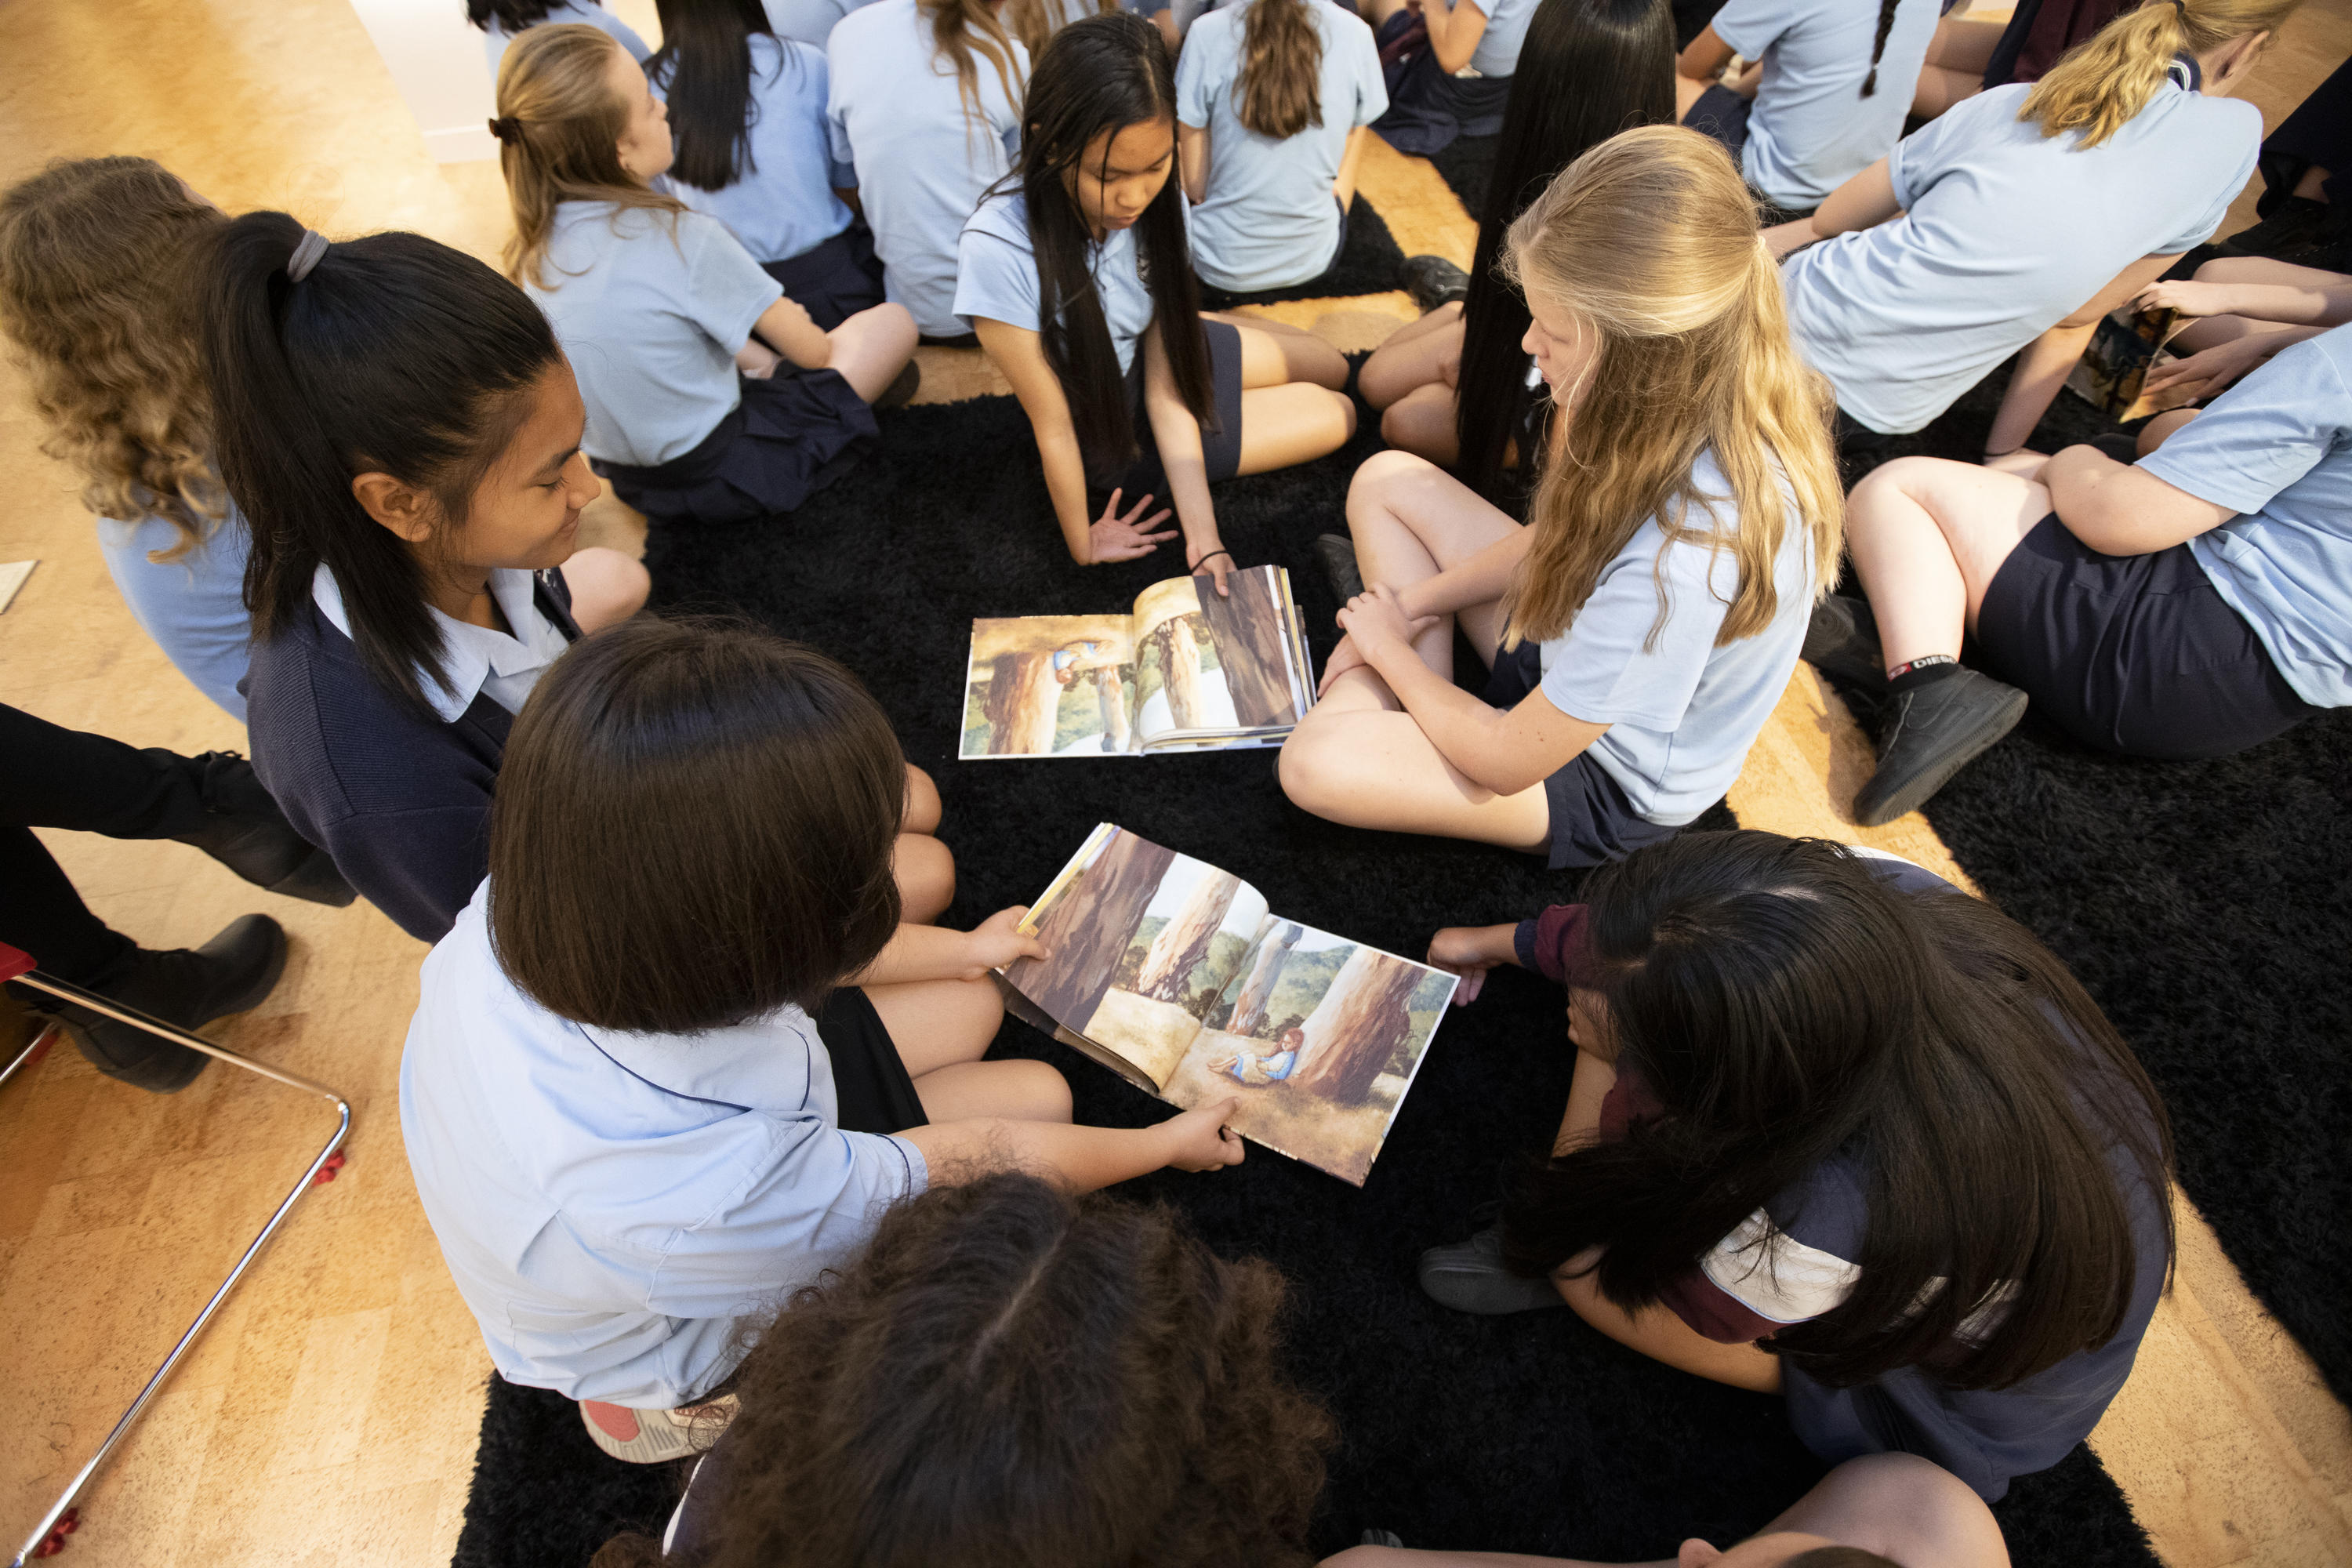 A group of students gathered around picture books